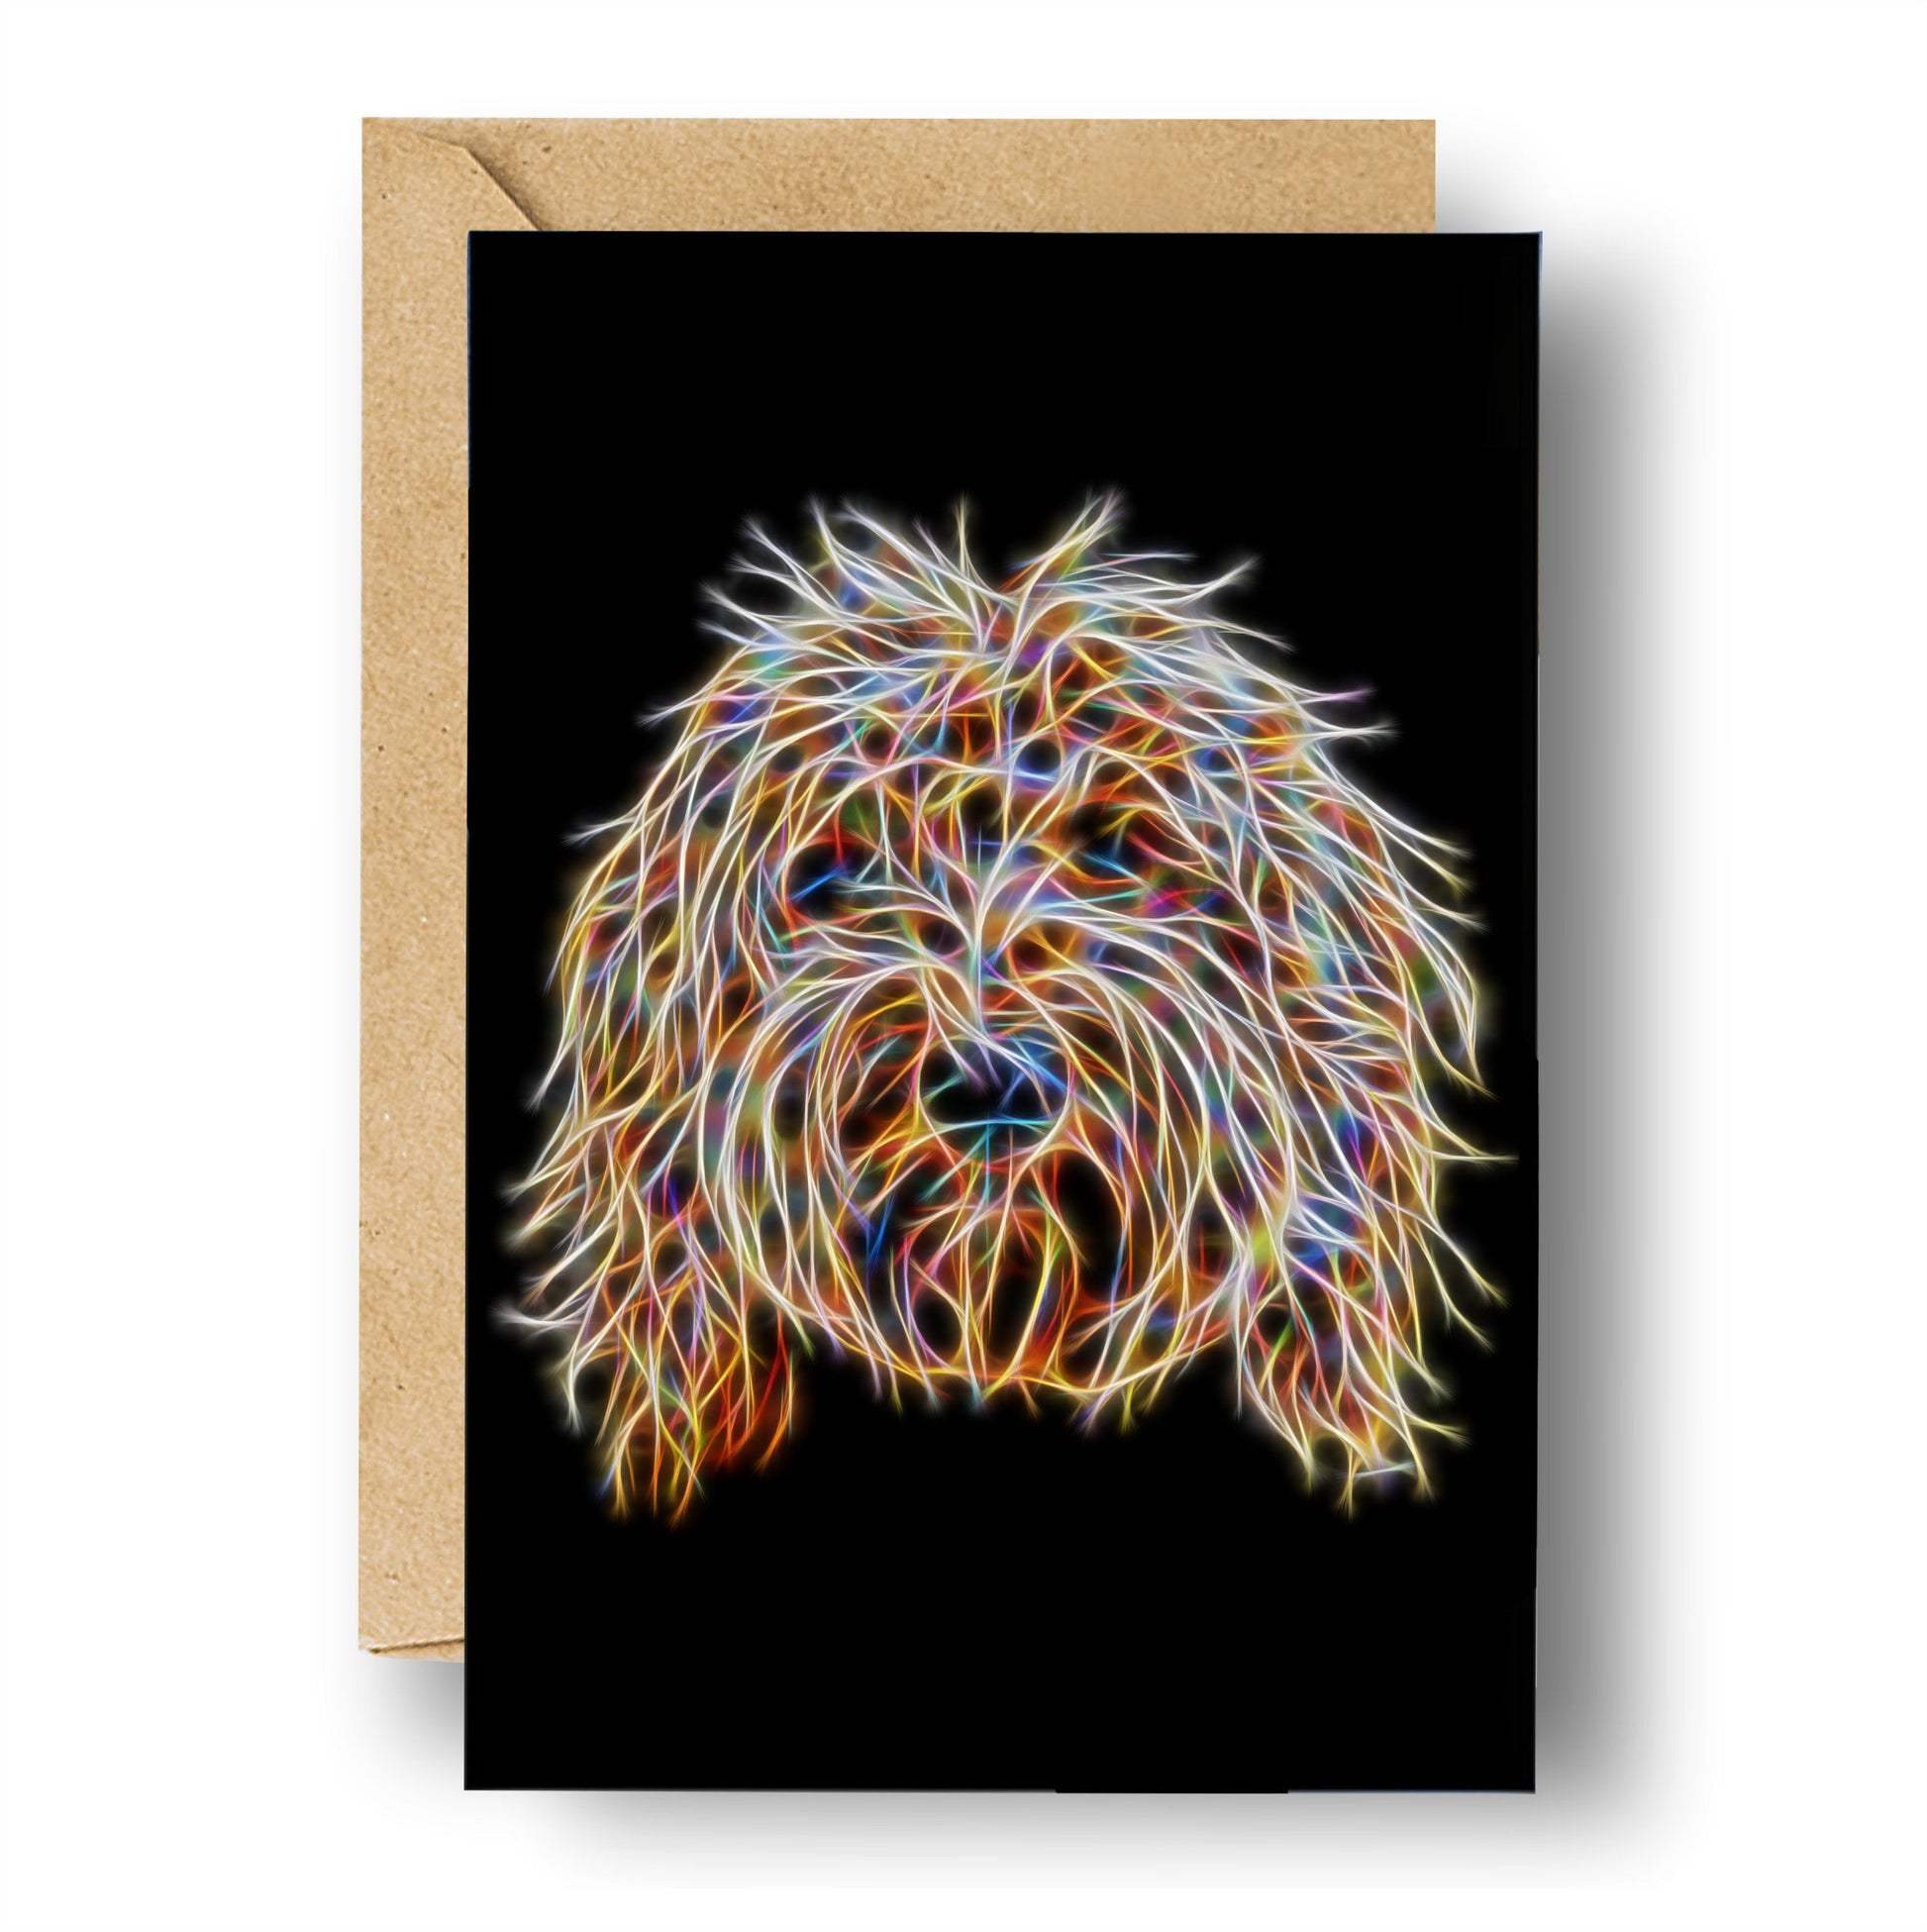 Gold Labradoodle Blank Birthday Greeting Card with Stunning Fractal Art Design